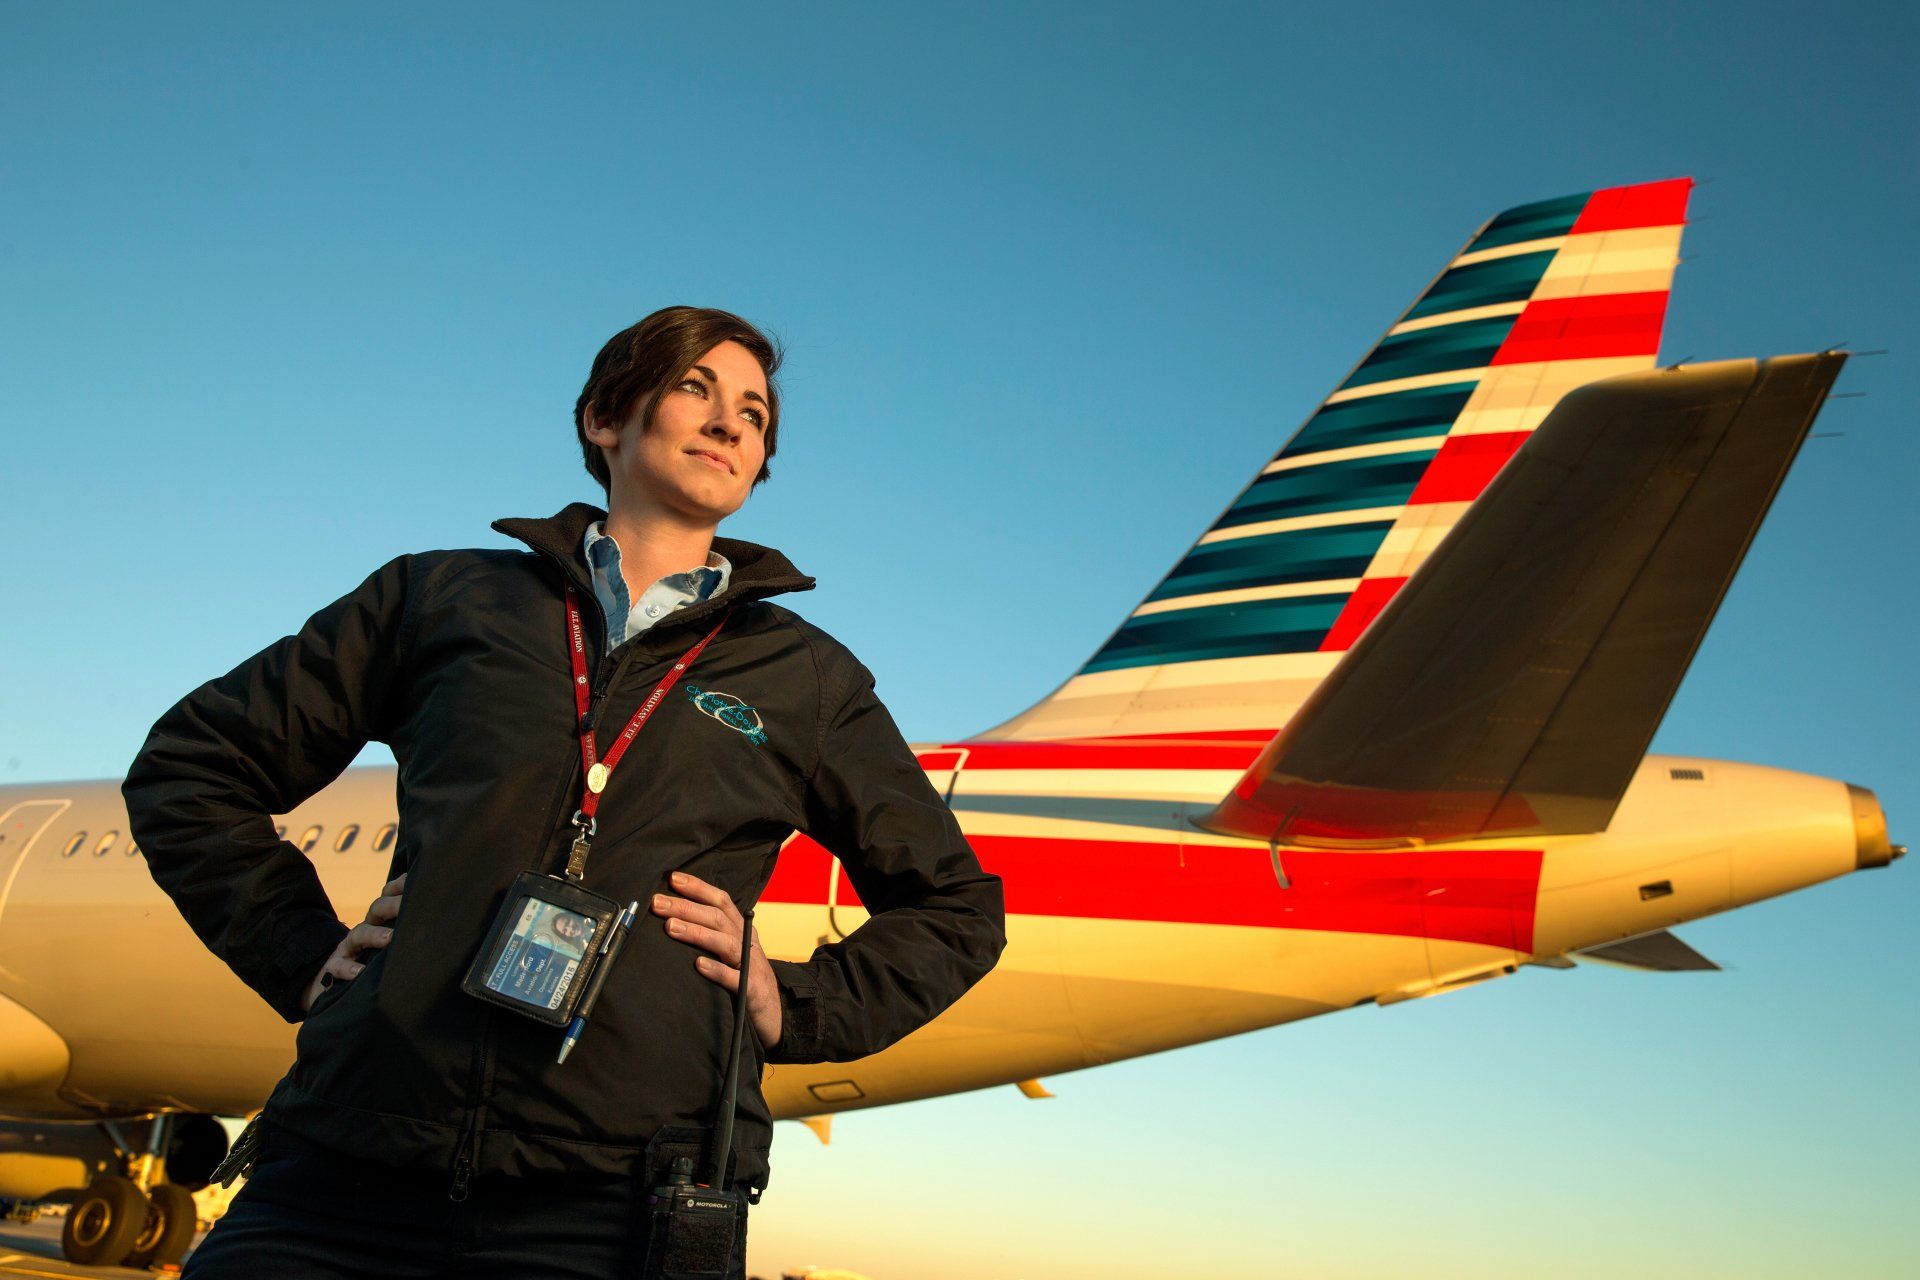 Airline industry employee poses with commercial aircraft